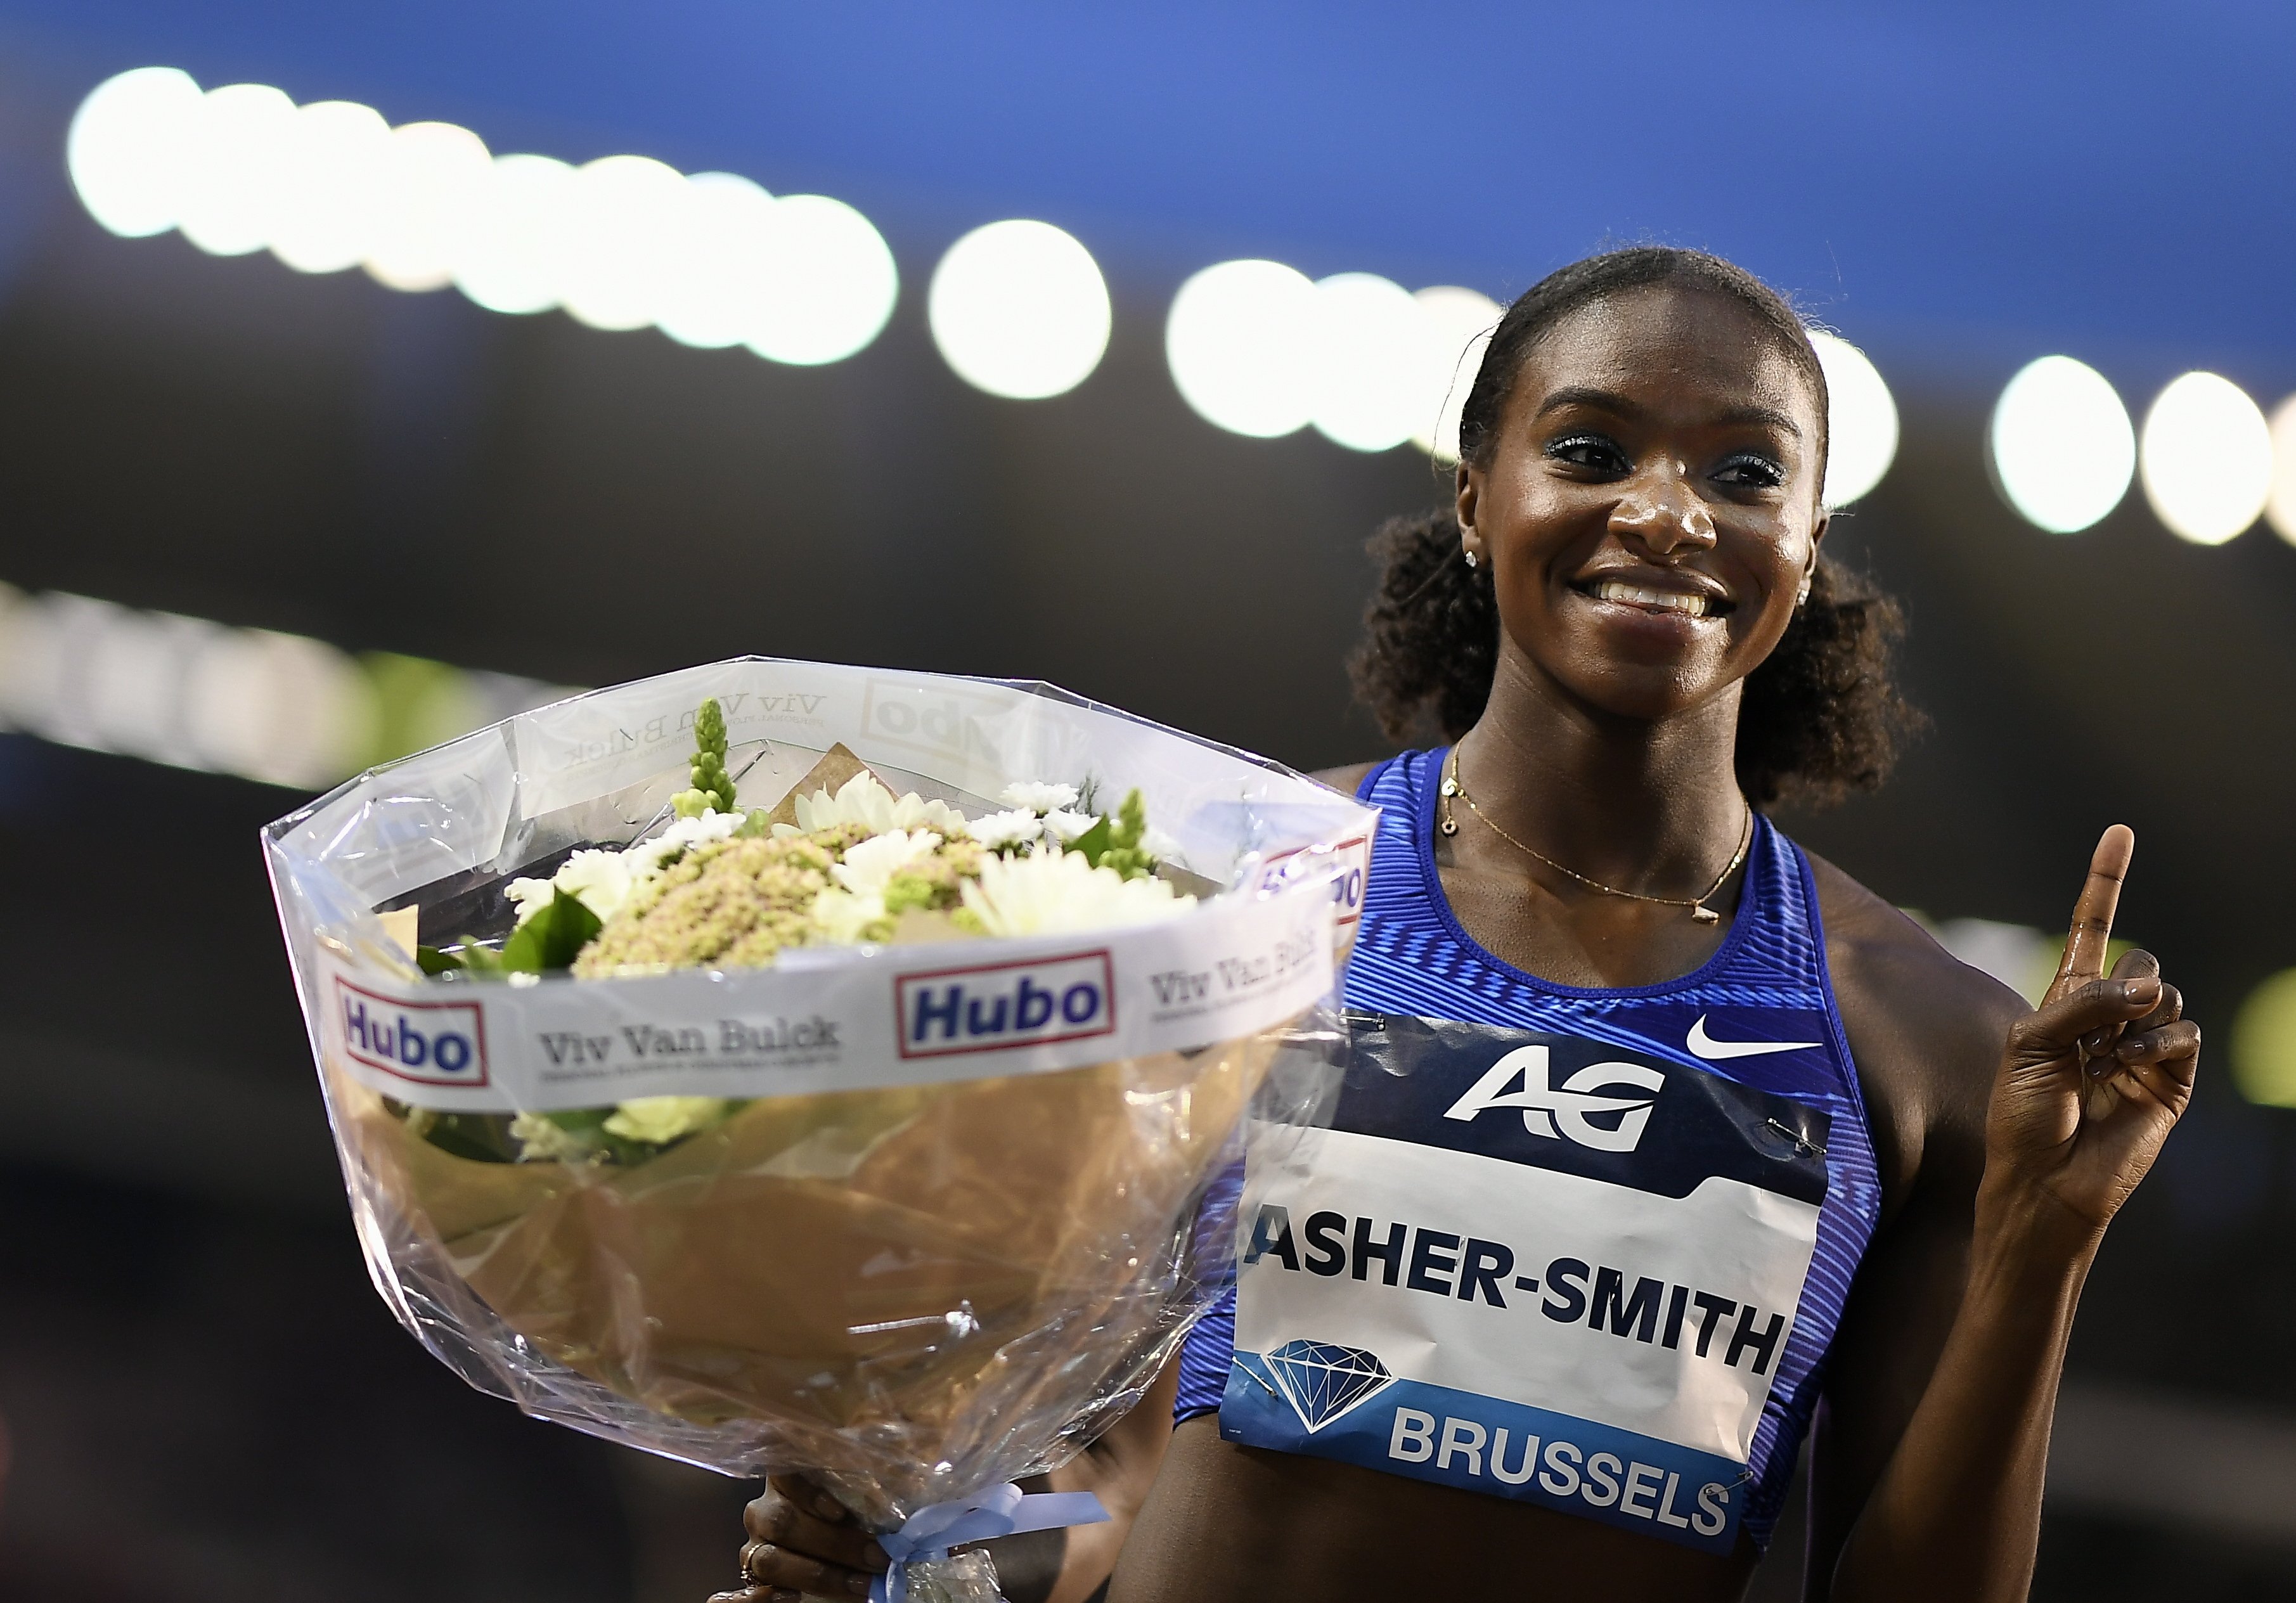 Britain's star Dina Asher-Smith strikes again in the 100m ...